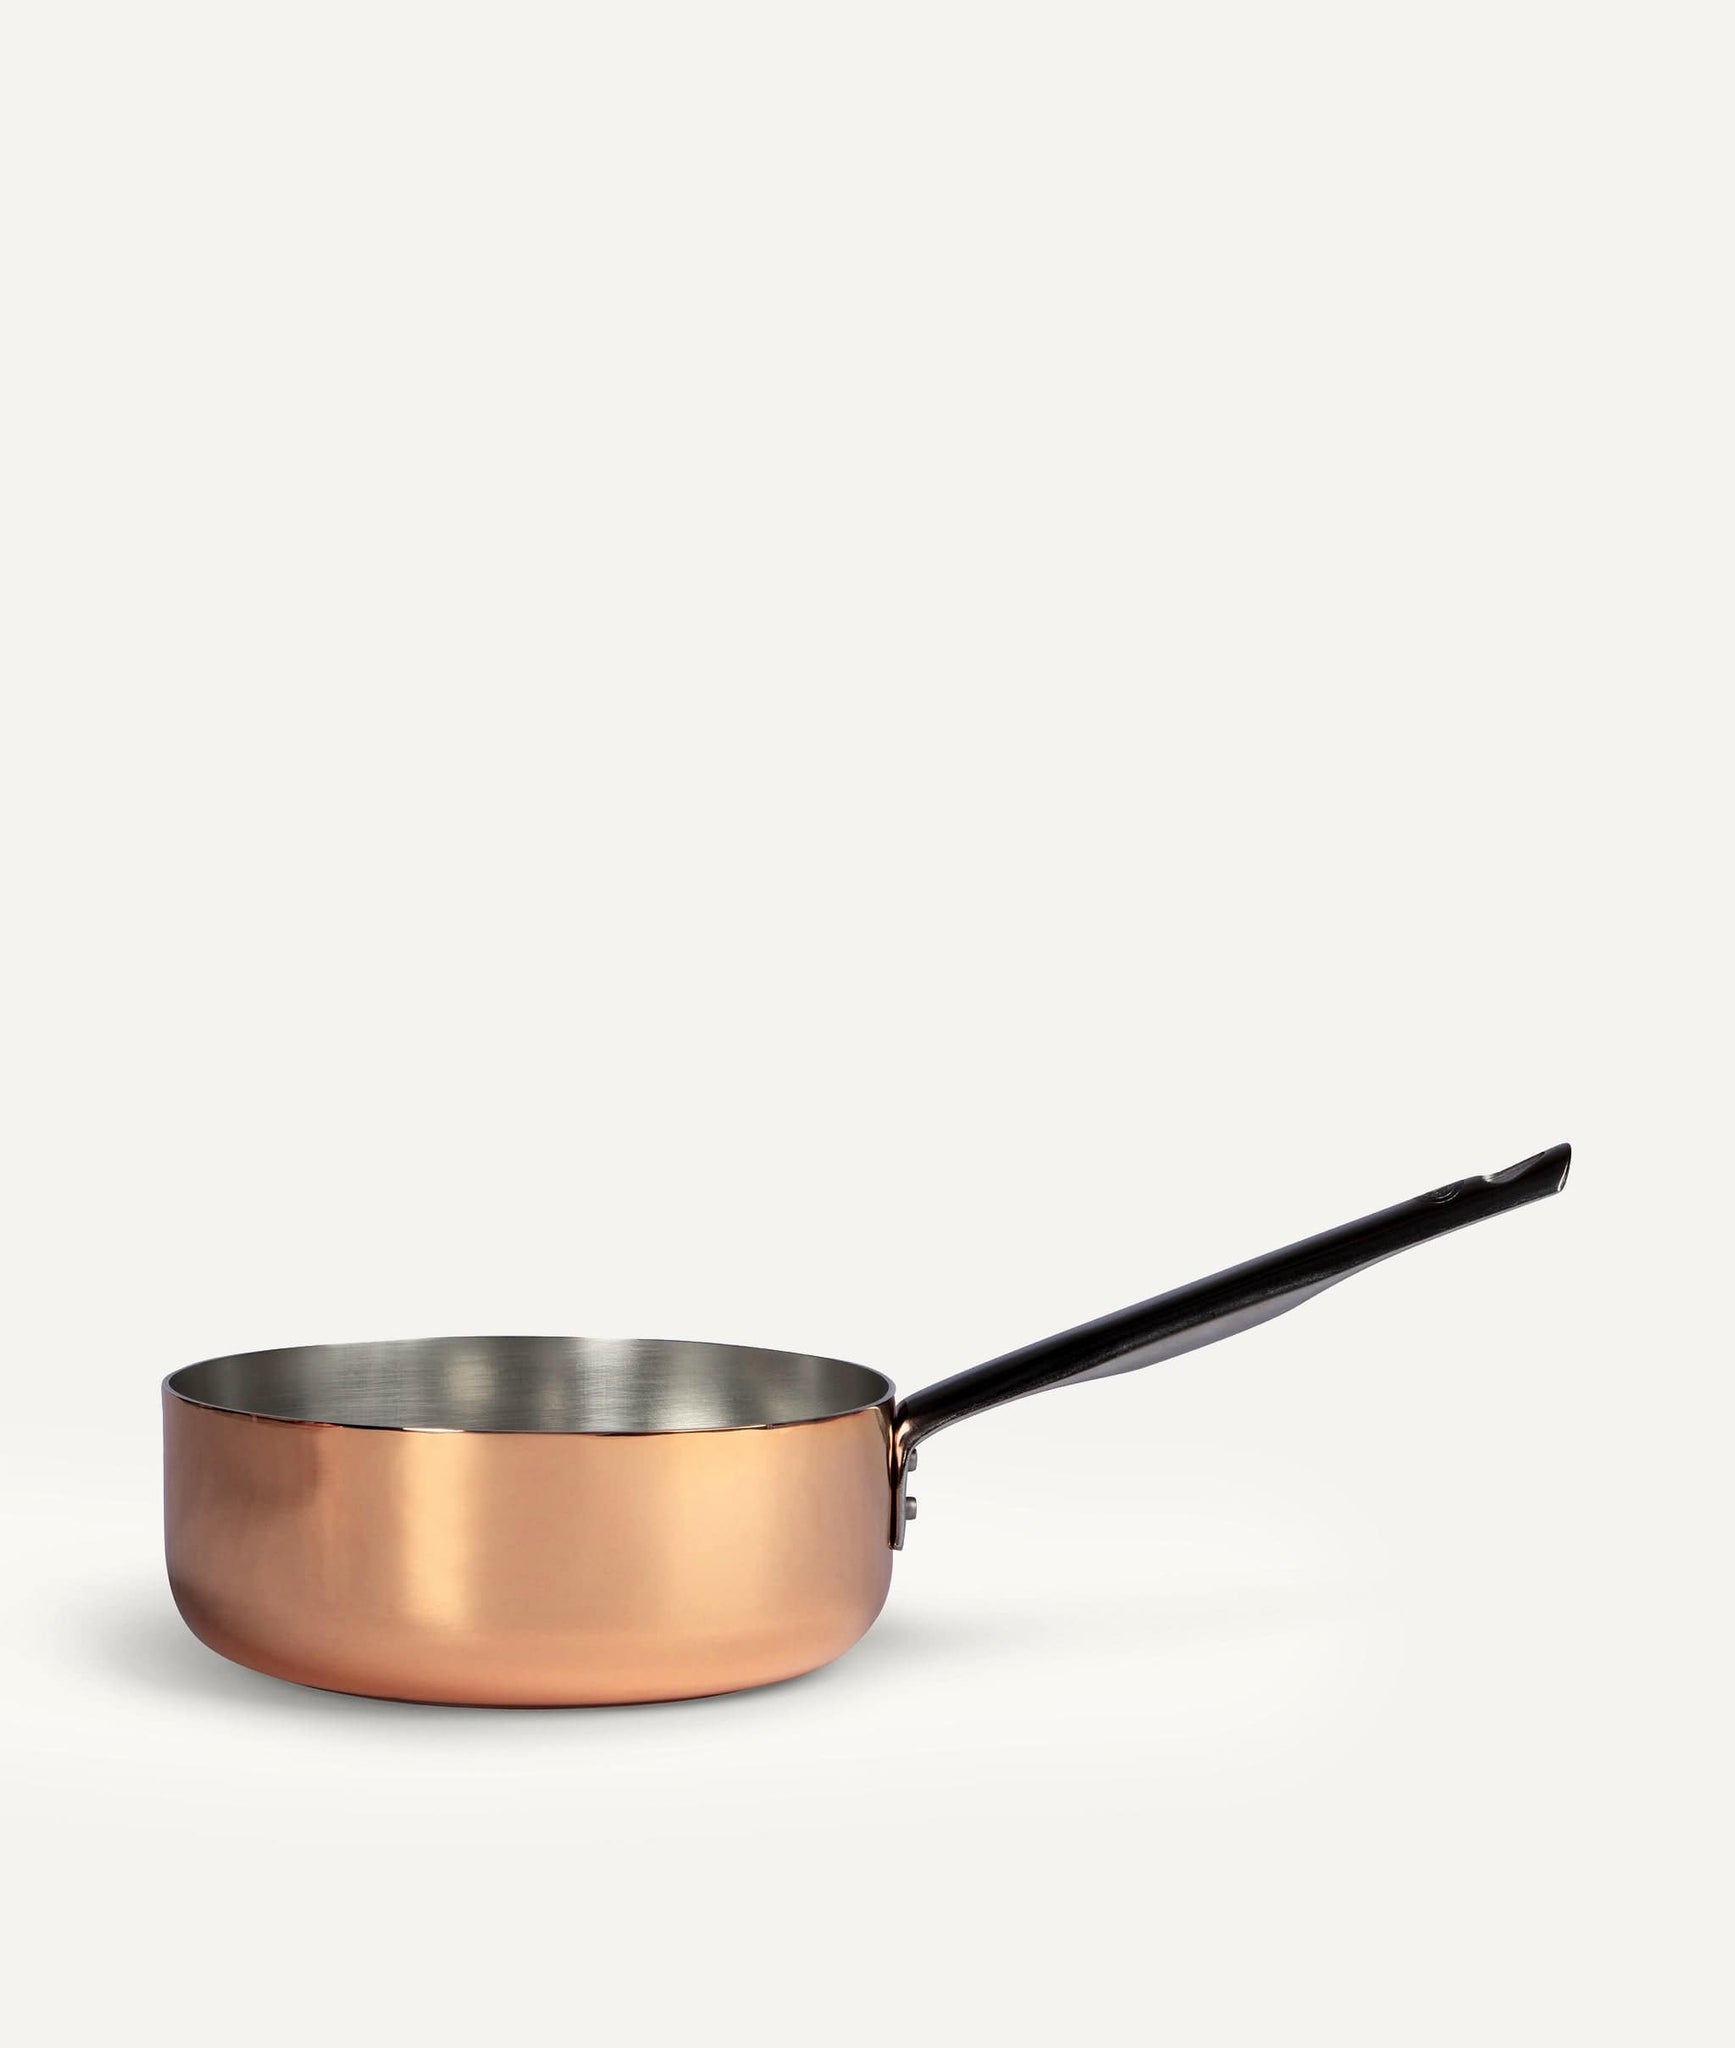 Induction One Handle Low Casserole in Tinned Copper